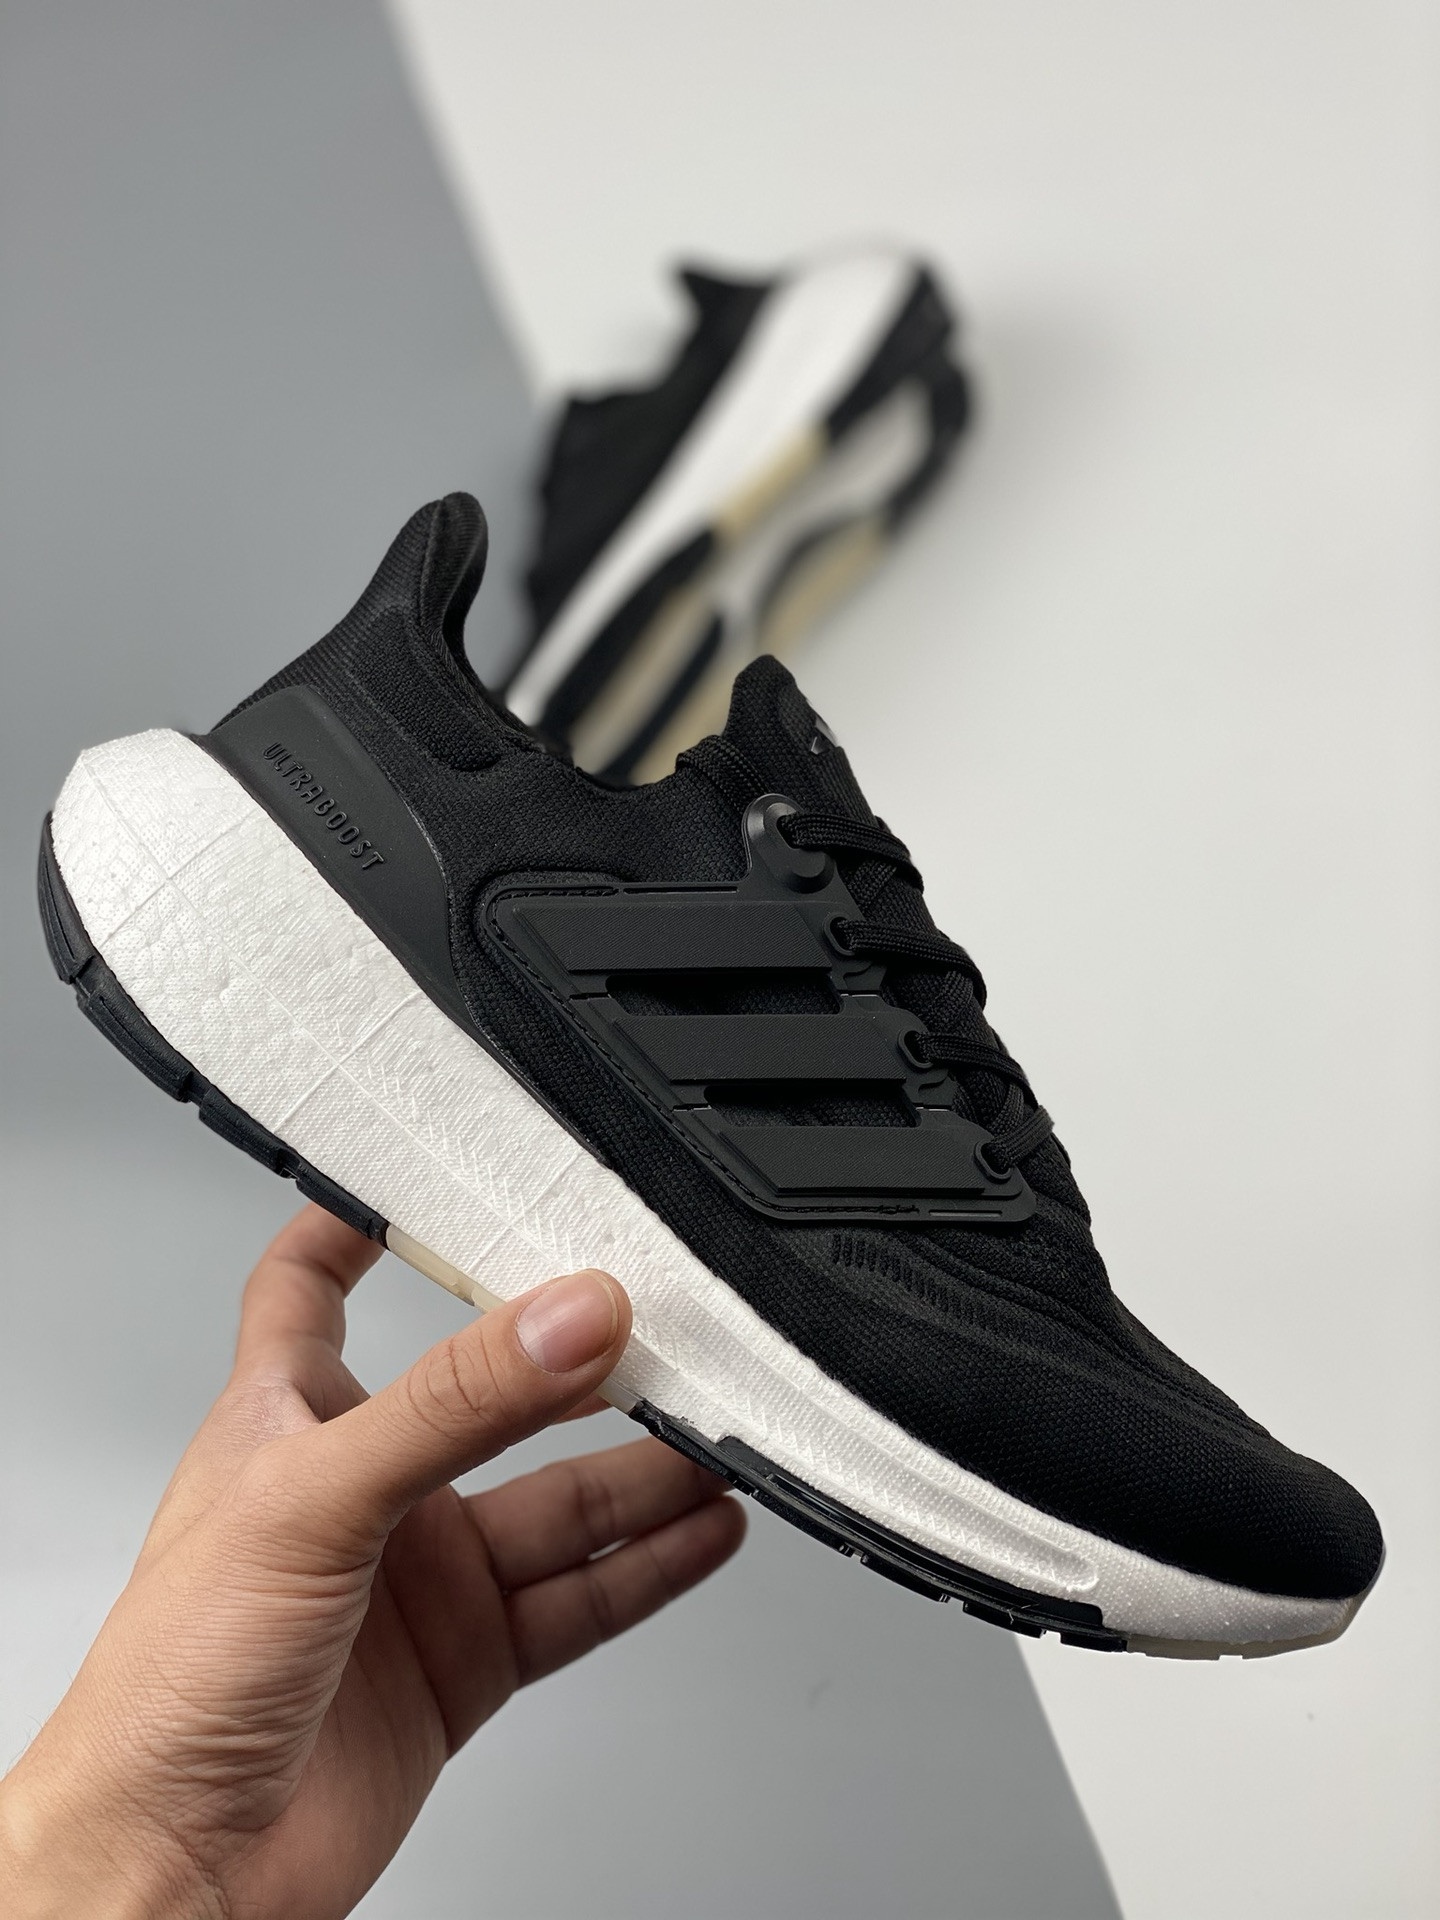 Adidas Ultra Boost Light Core Black White GY9351 For Sale